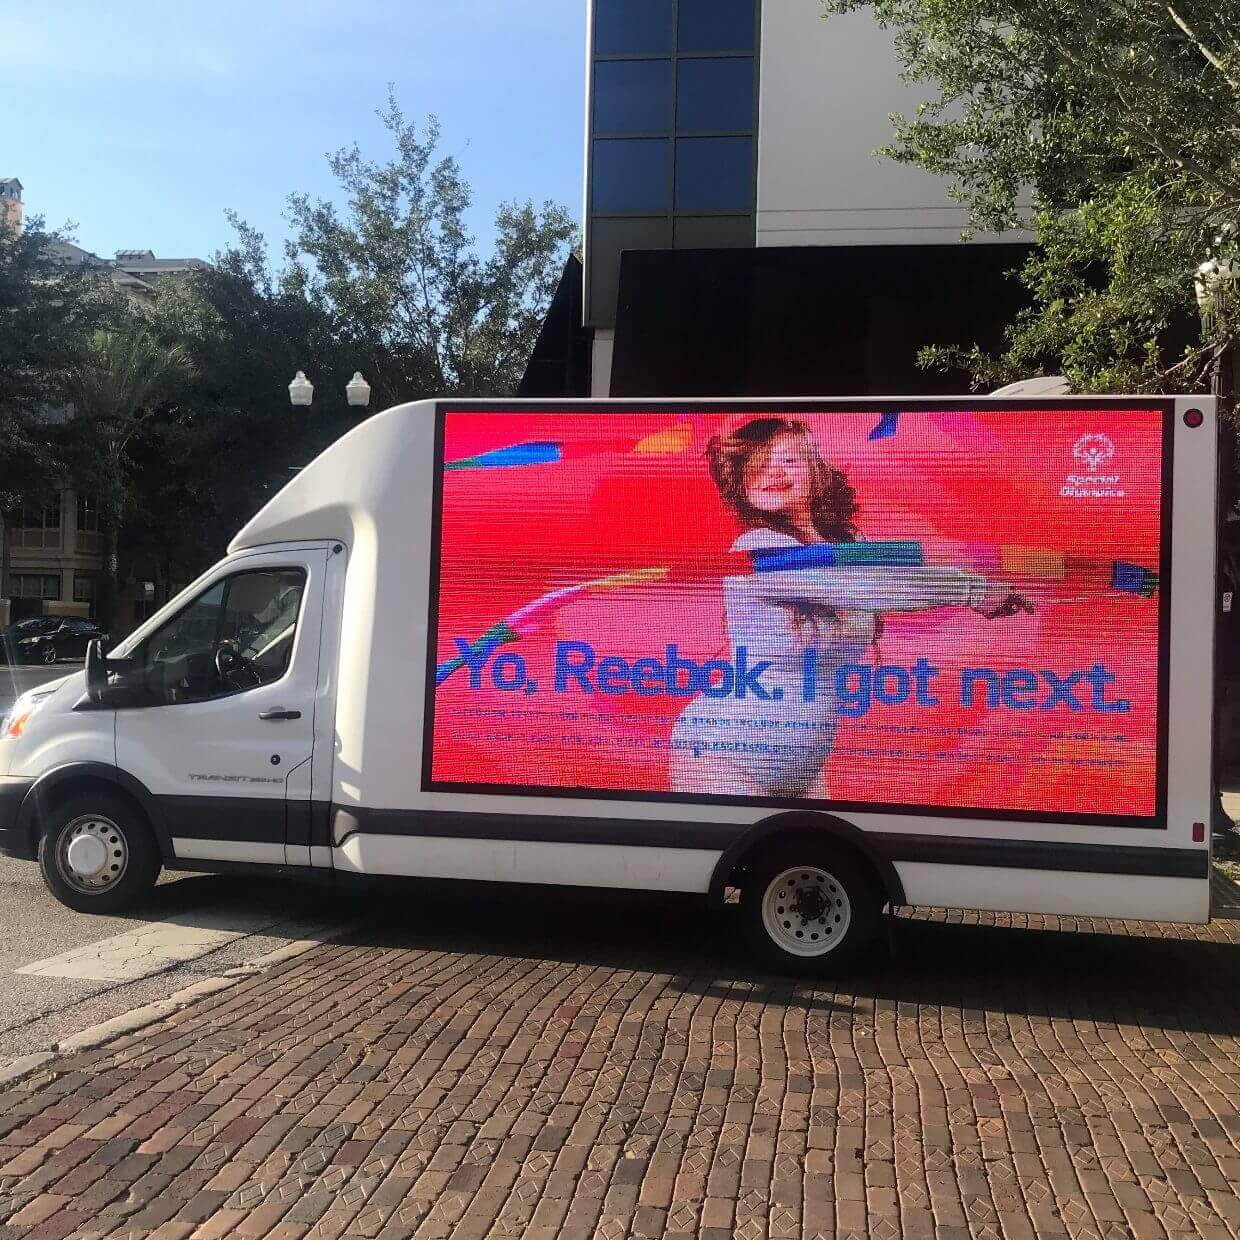 Through mobile billboards, brands are more able to secure their relevance in the market